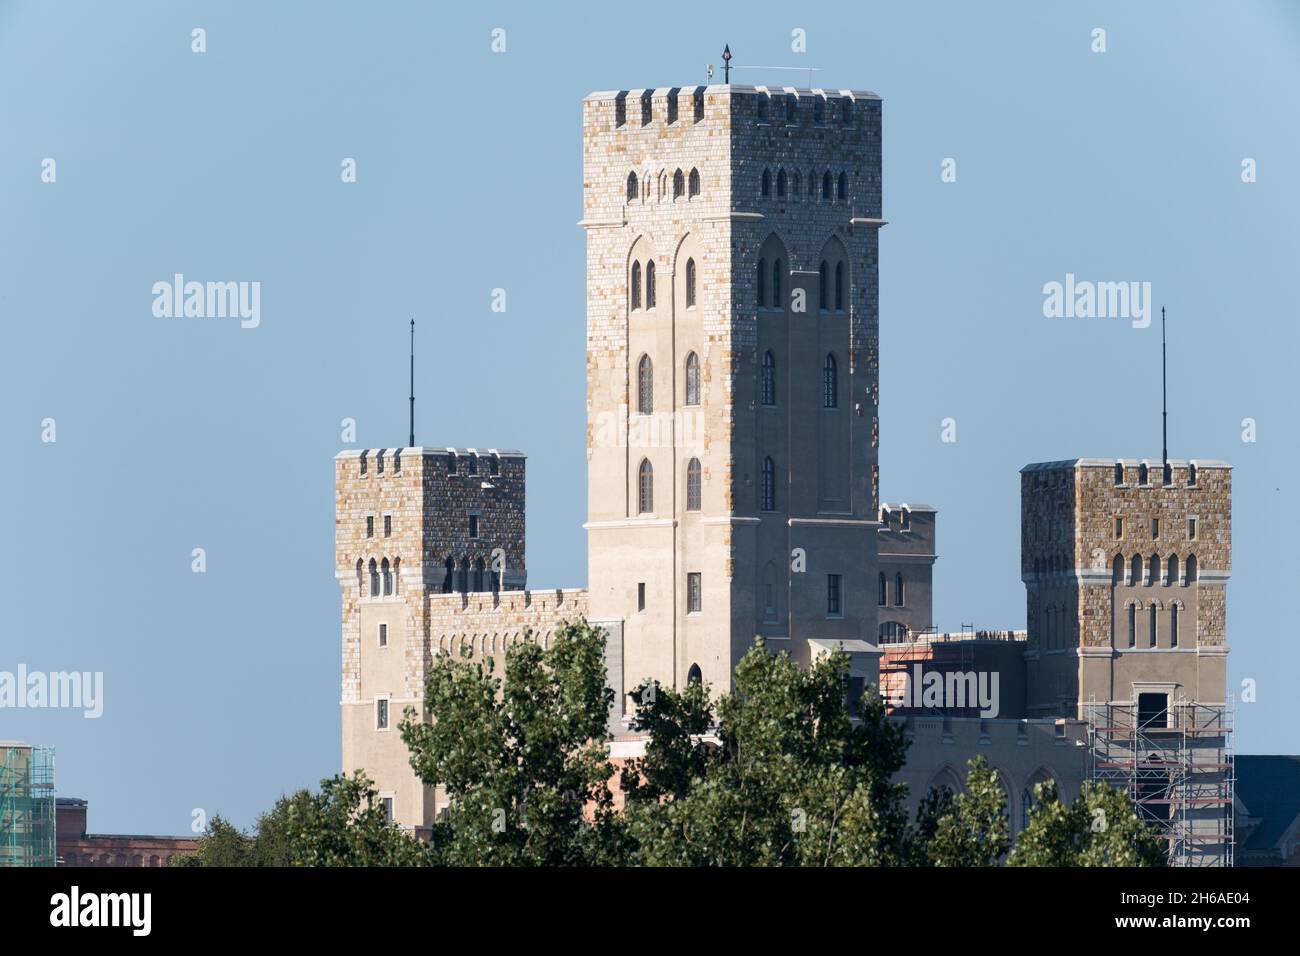 Construction site of multifunctional building castle in Stobnica, Poland. September 9th 2021 © Wojciech Strozyk / Alamy Stock Photo Stock Photo